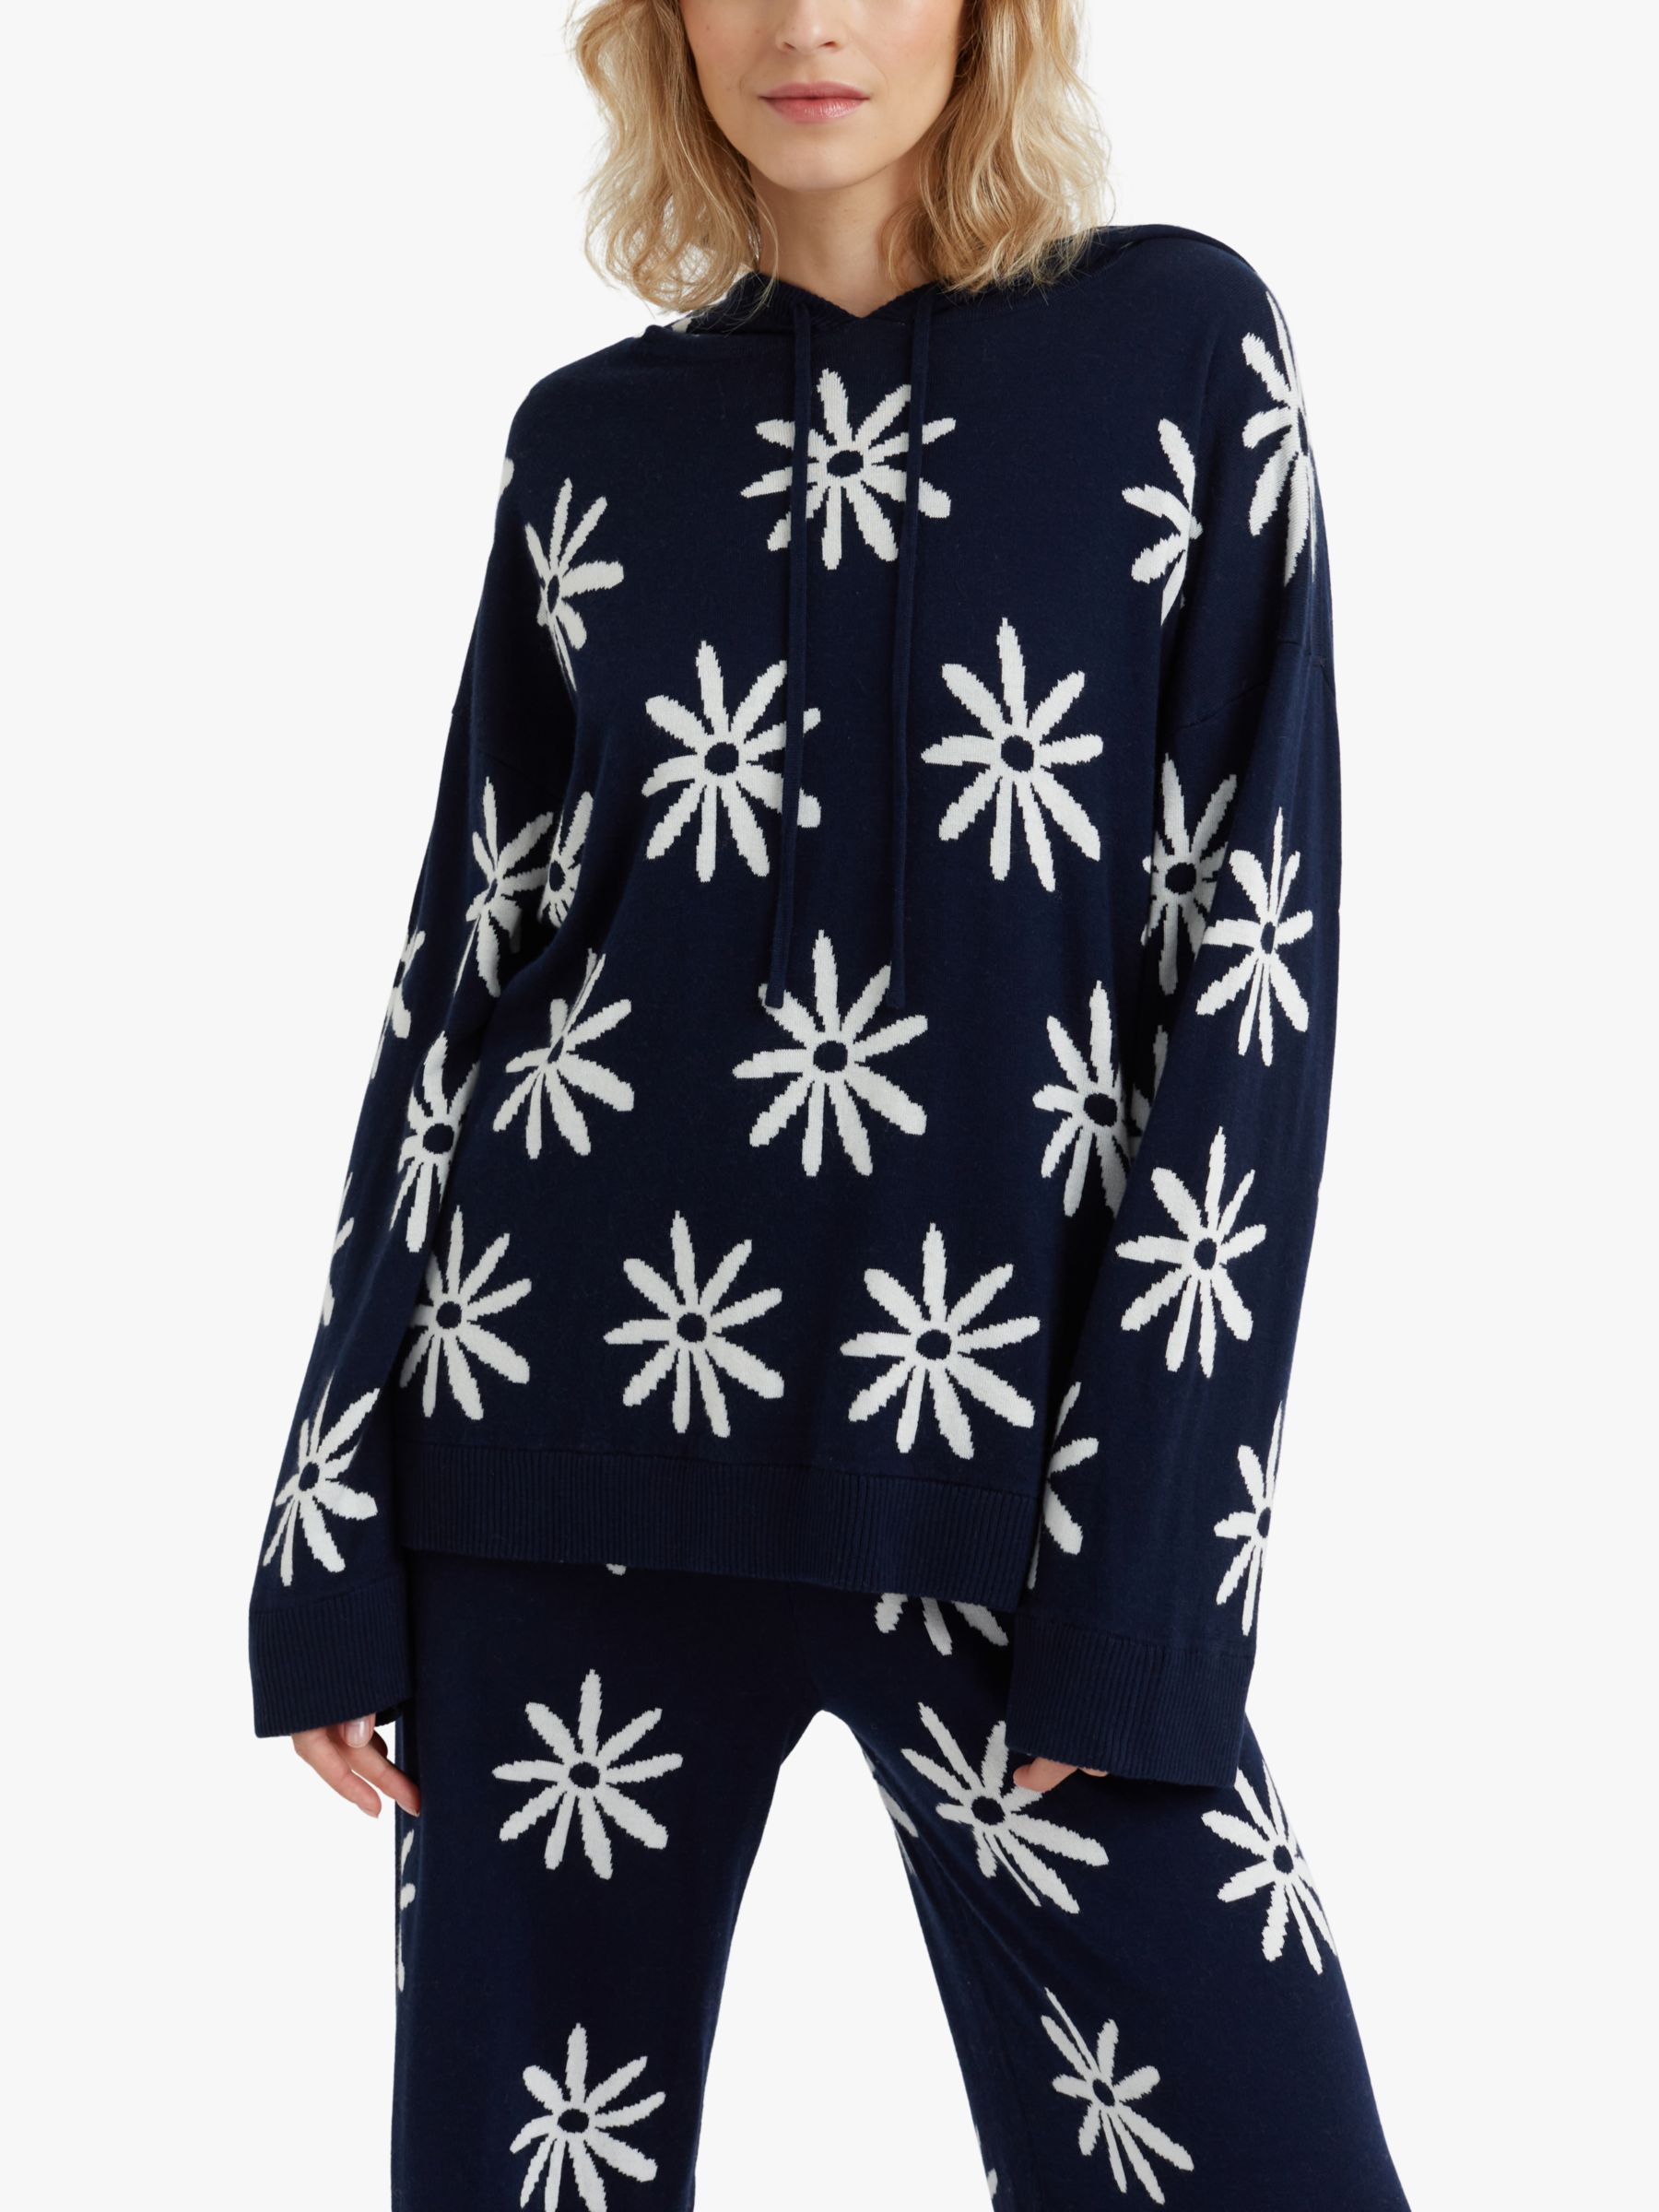 Chinti & Parker Ditsy Daisy Cashmere Blend Hoodie, Deep Navy/Multi, XL